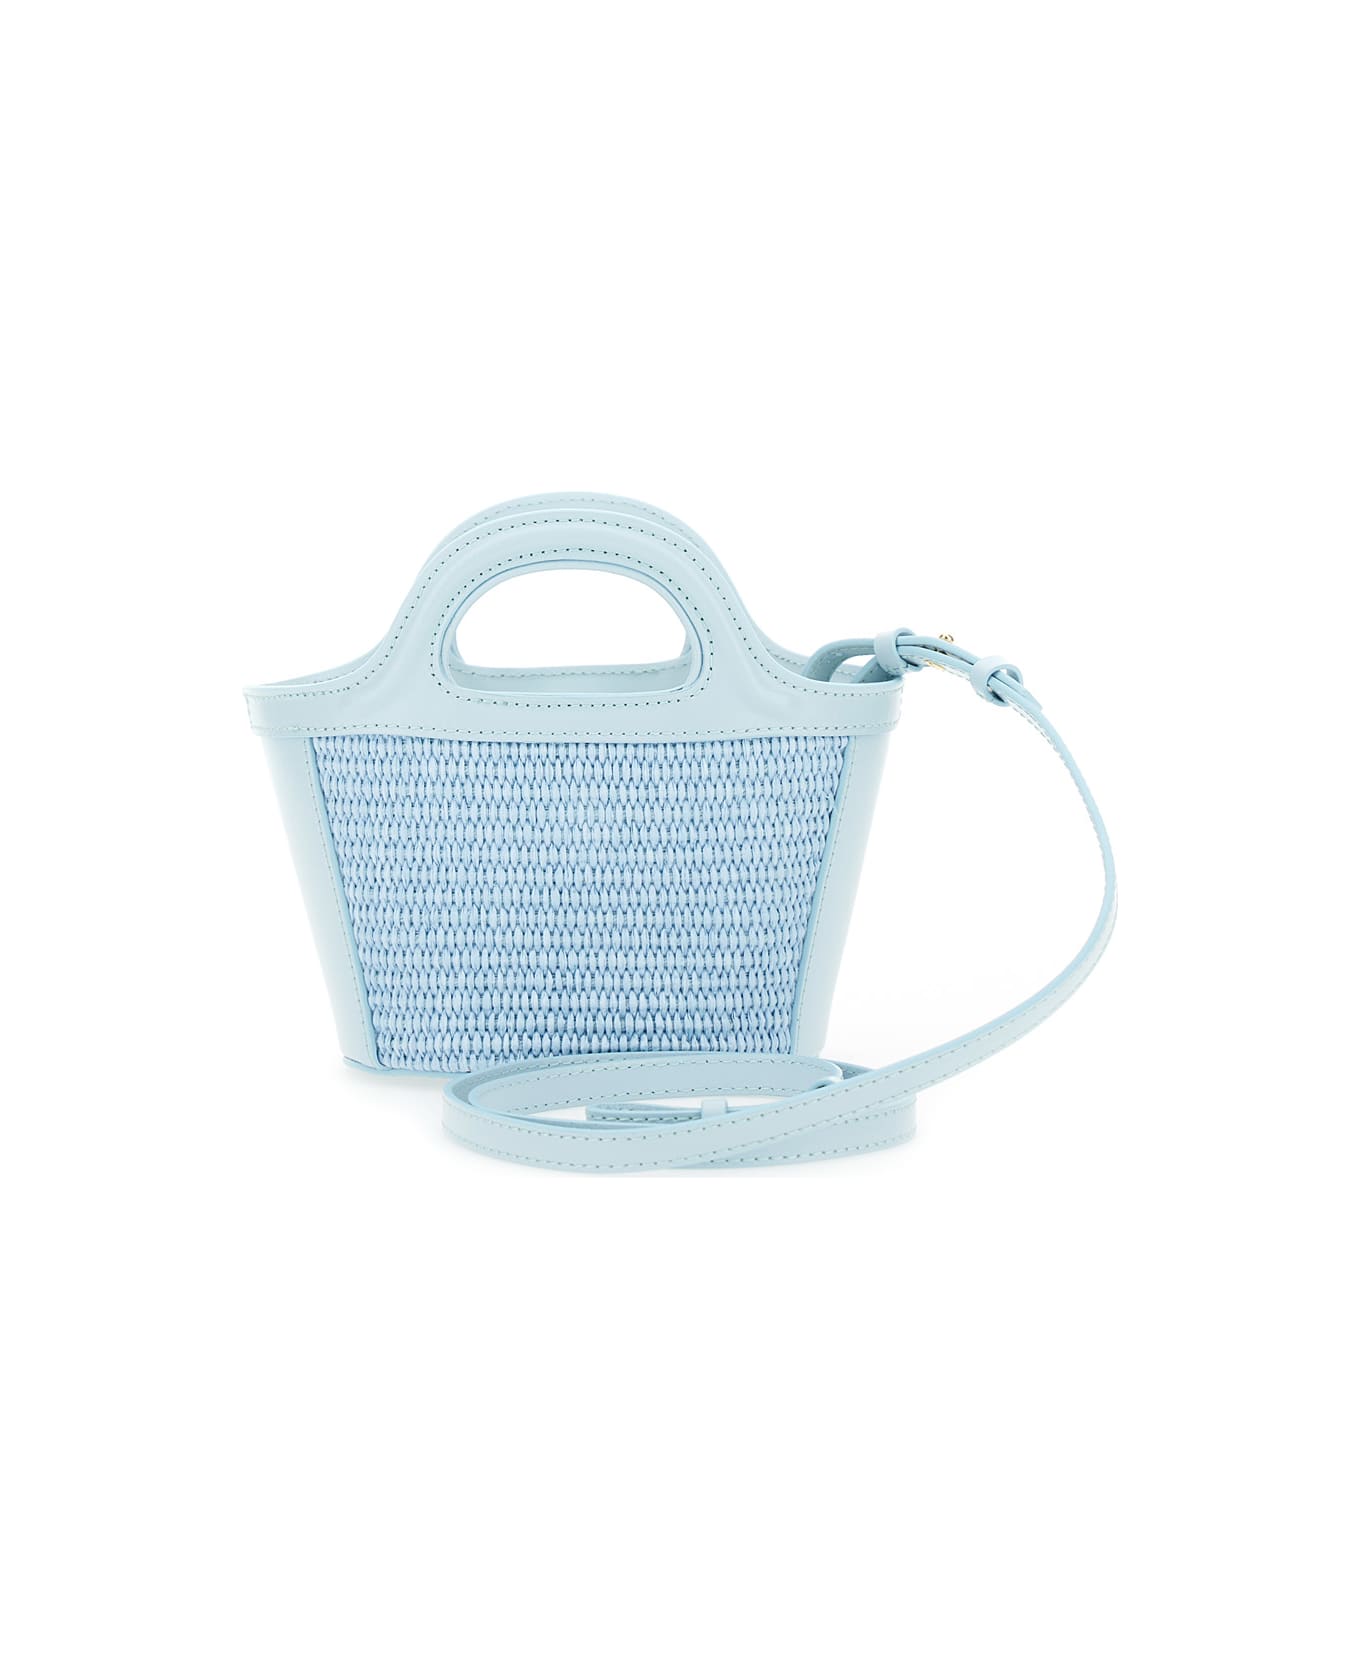 Marni 'tropicalia' Light Blue Handbag With Embroidered Logo In Raffia And Leather Girl - Light blue アクセサリー＆ギフト